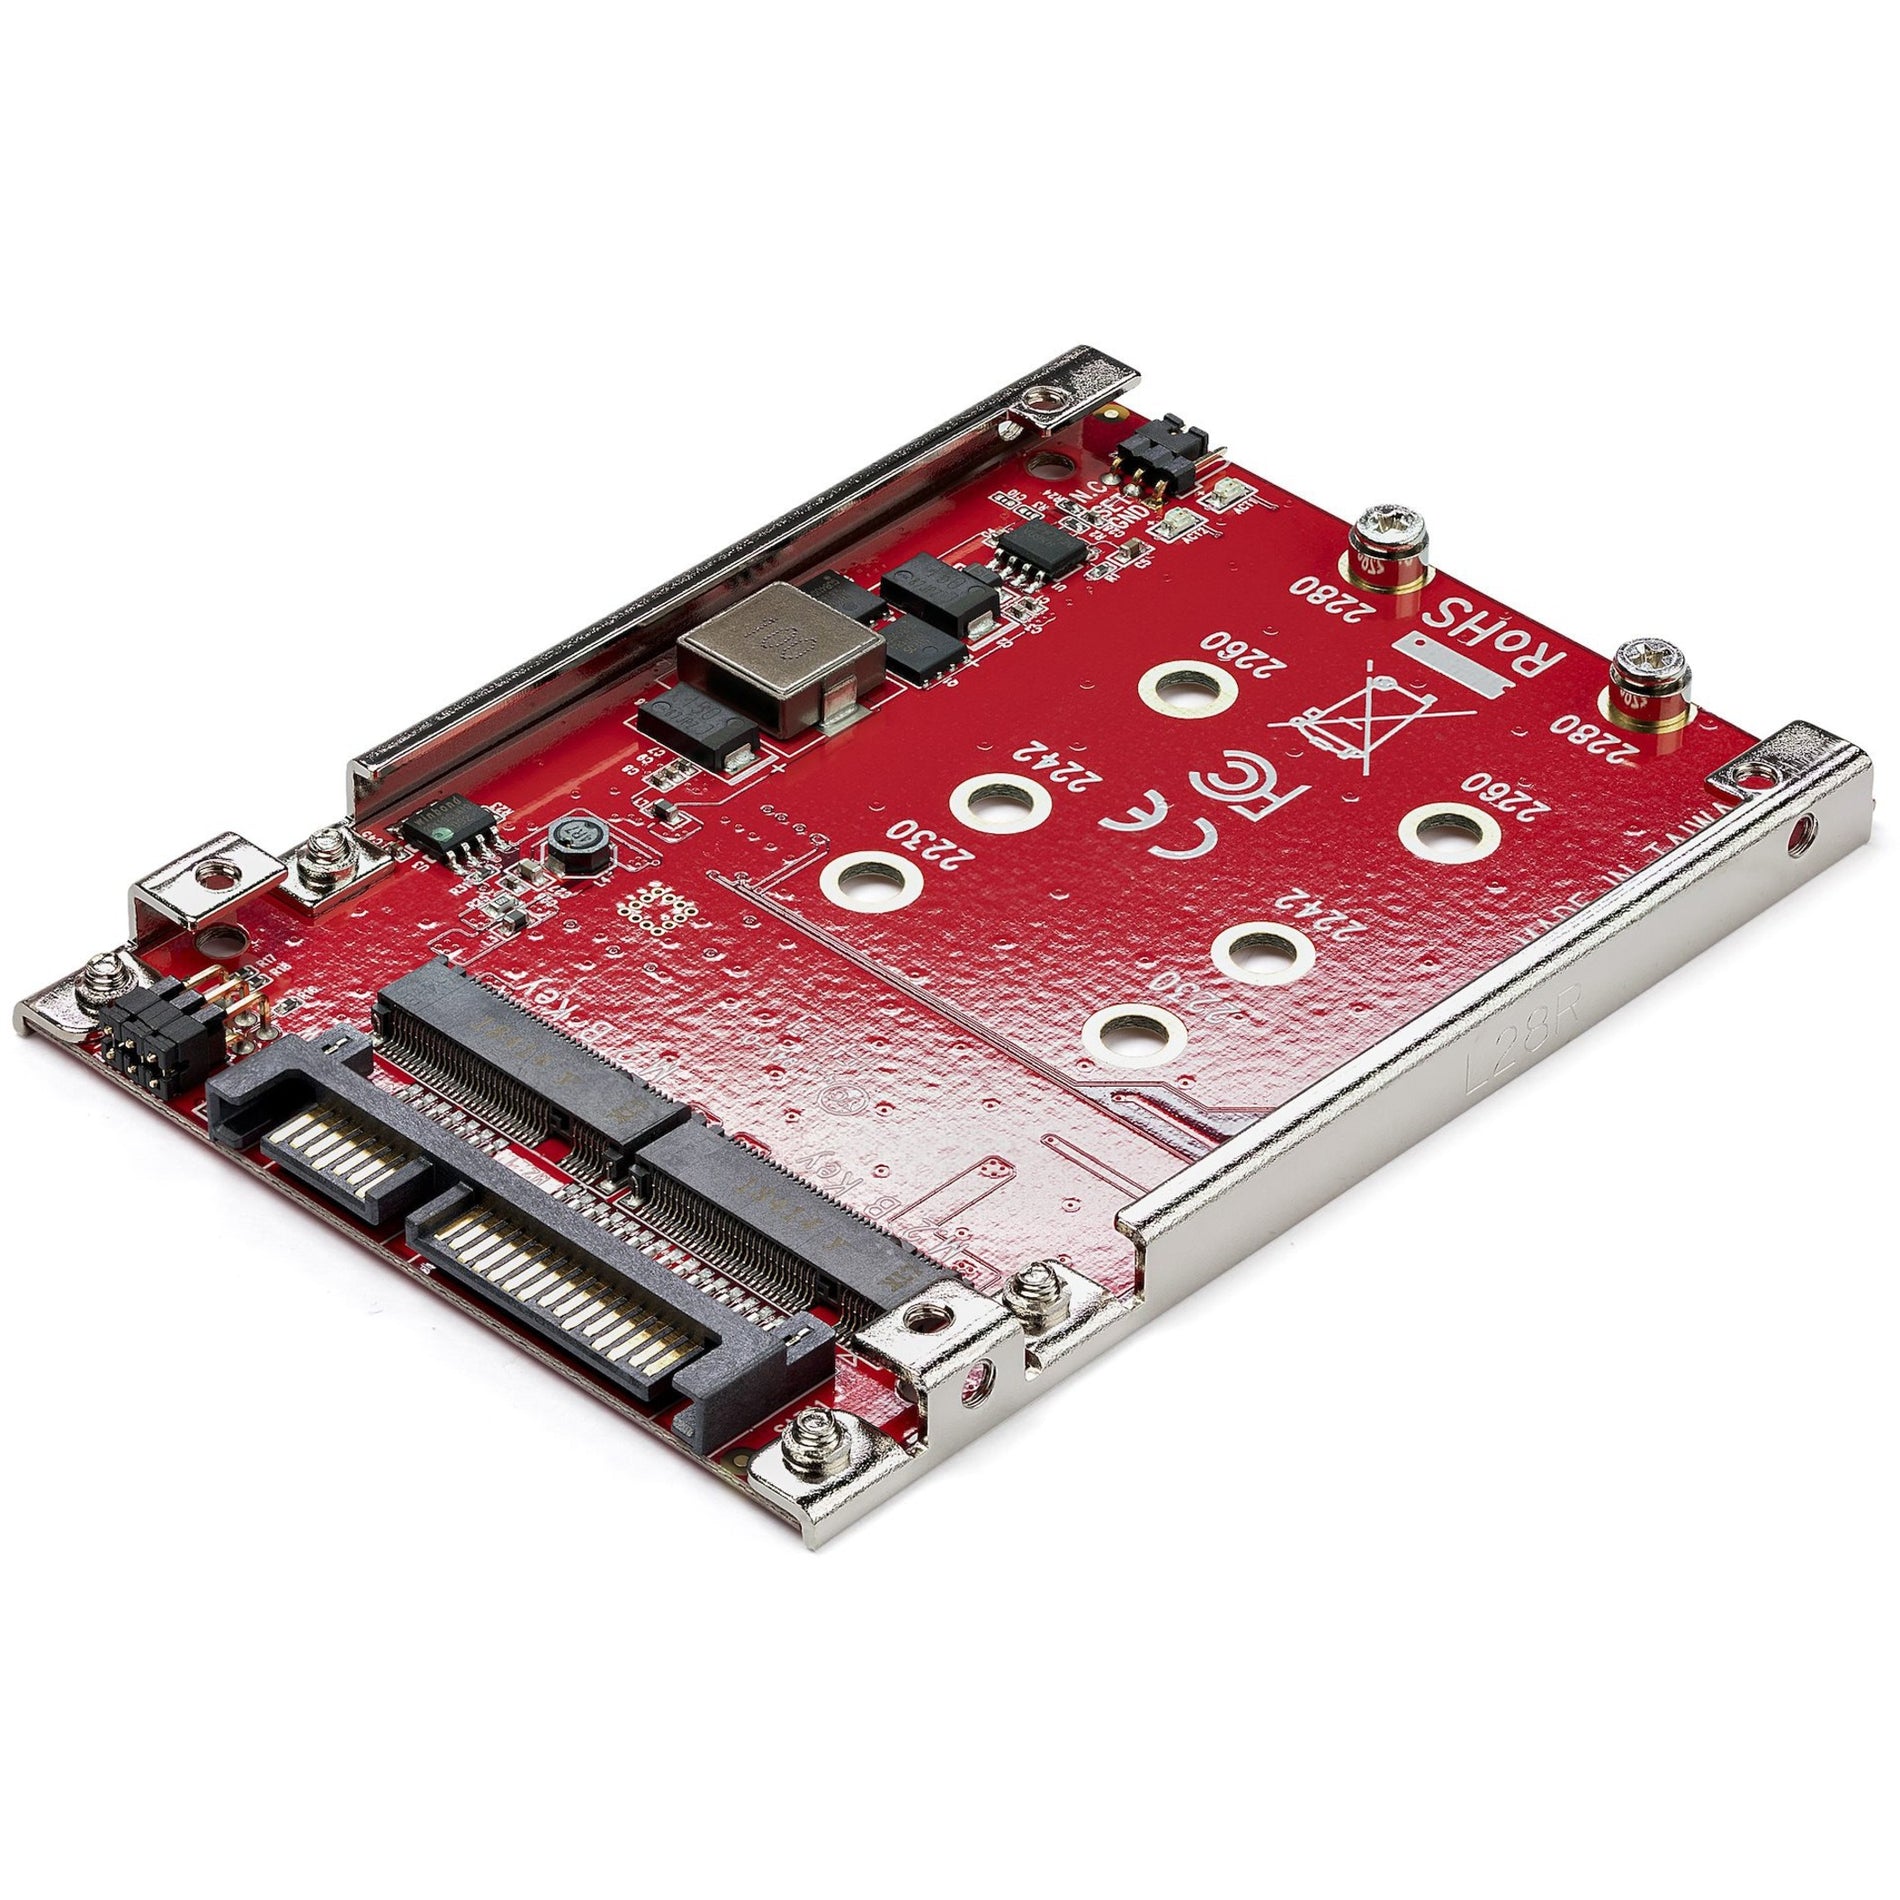 StarTech.com S322M225R Dual-Slot M.2 to SATA Adapter - M.2 SATA Adapter for 2.5" Drive Bay, RAID Support